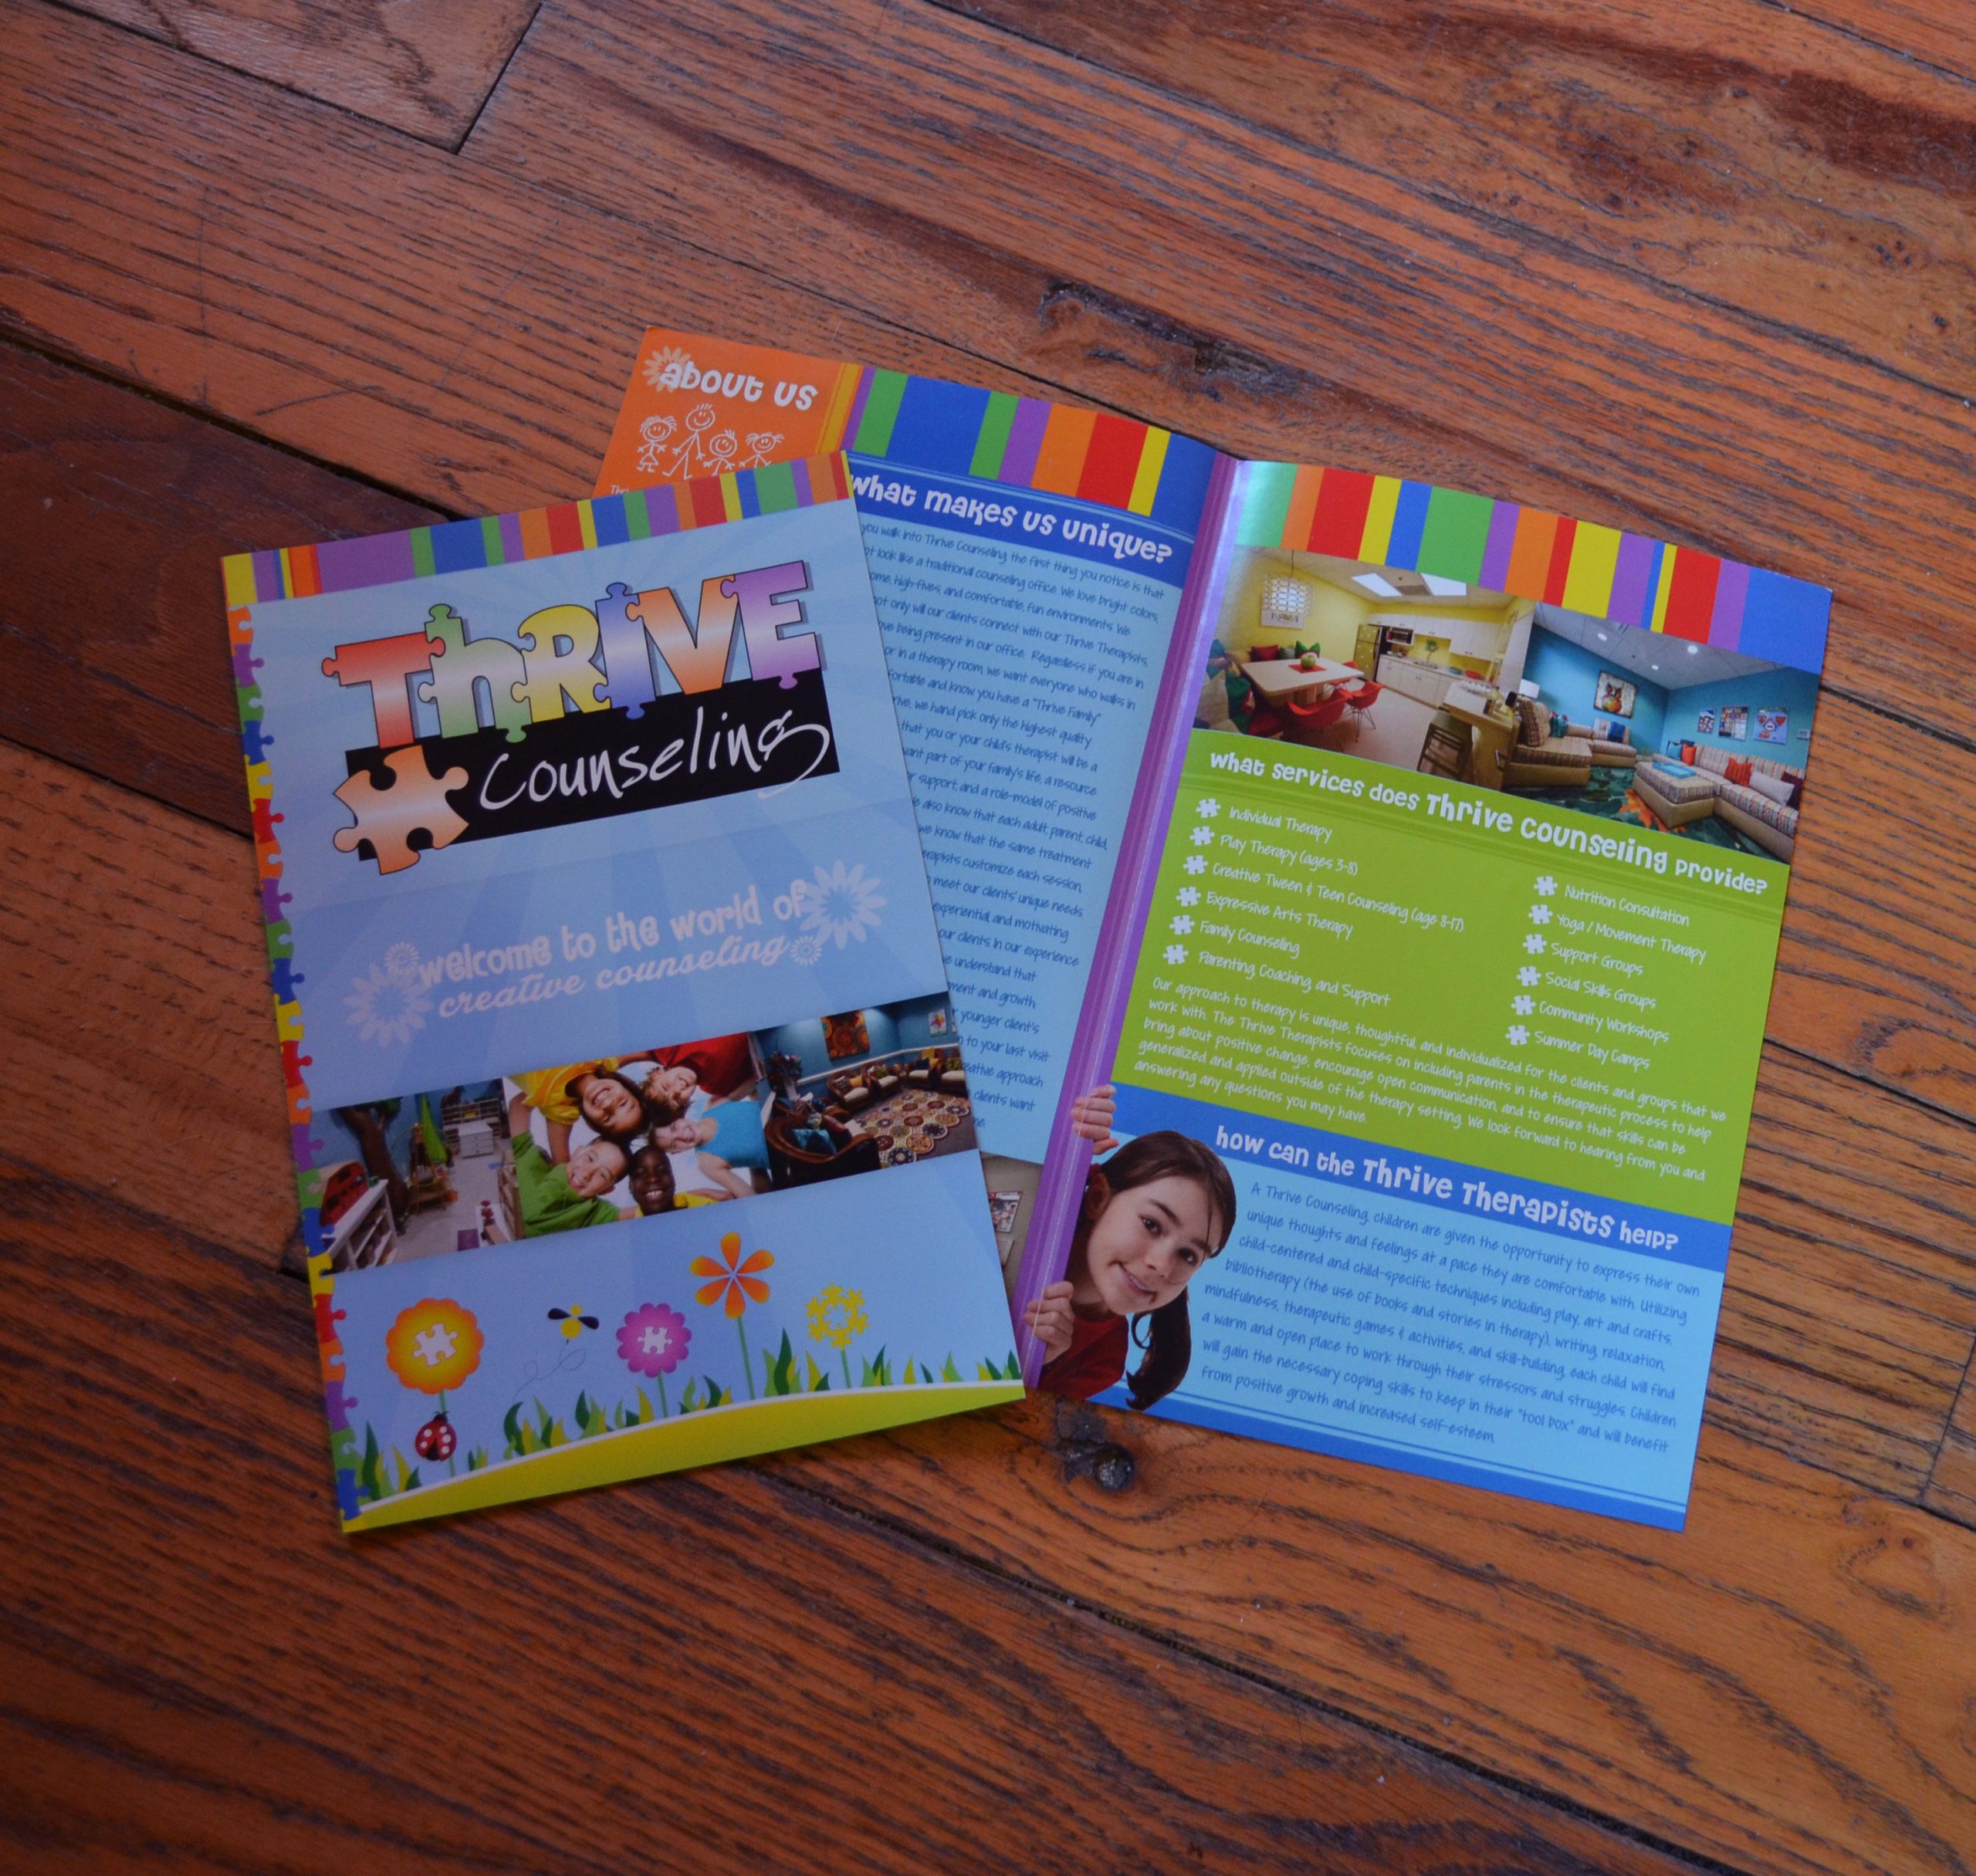 Thrive Counseling Bifold Brochure Design